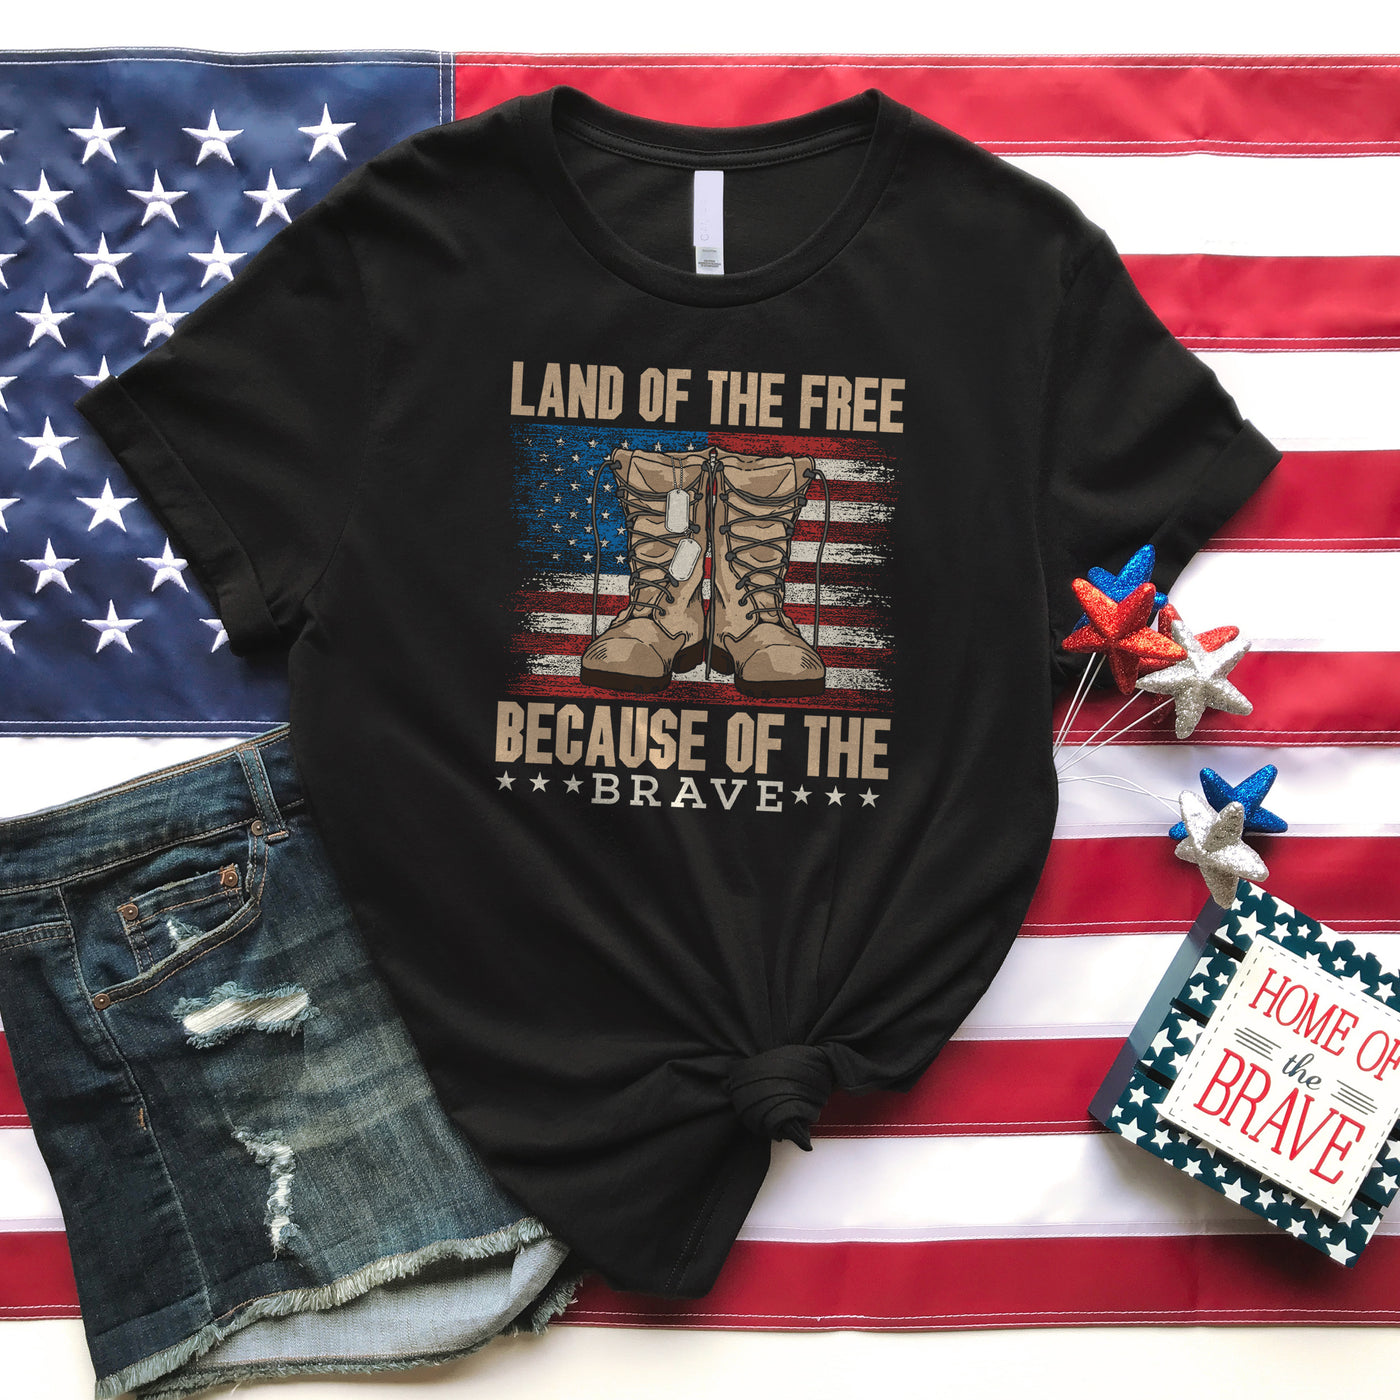 Land of the Brave US Flag T-shirt